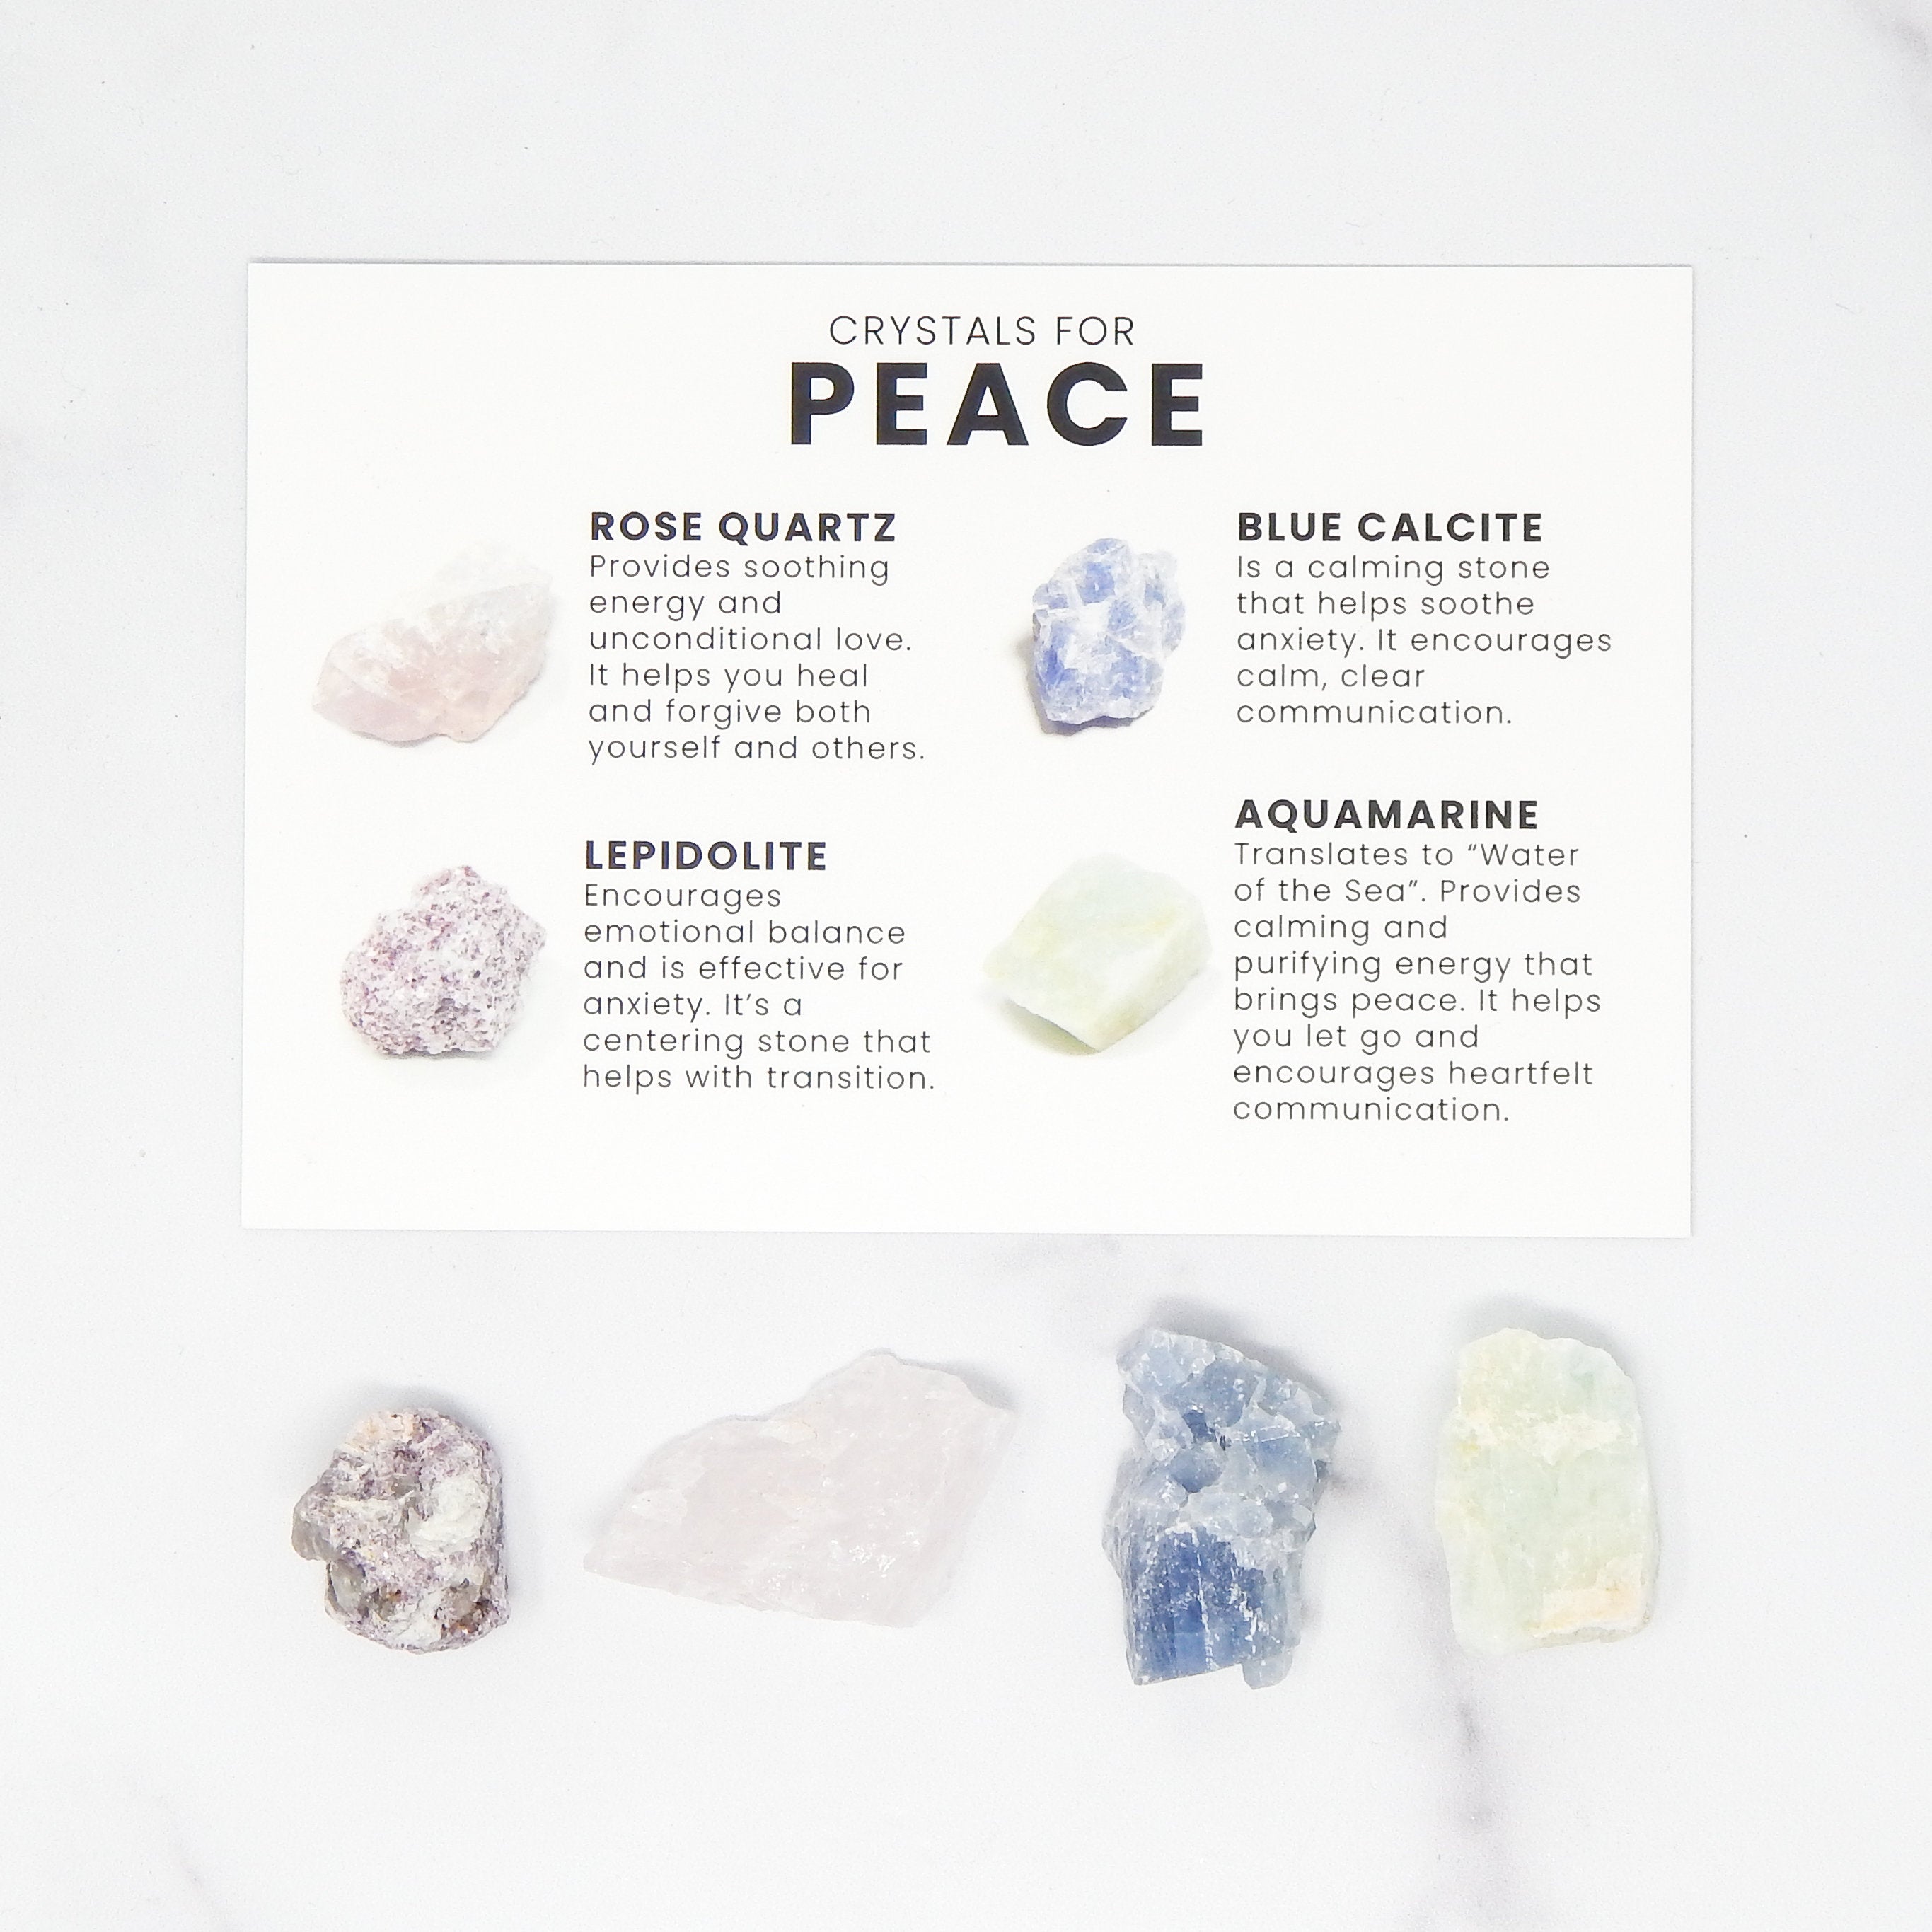 Crystals for Peace